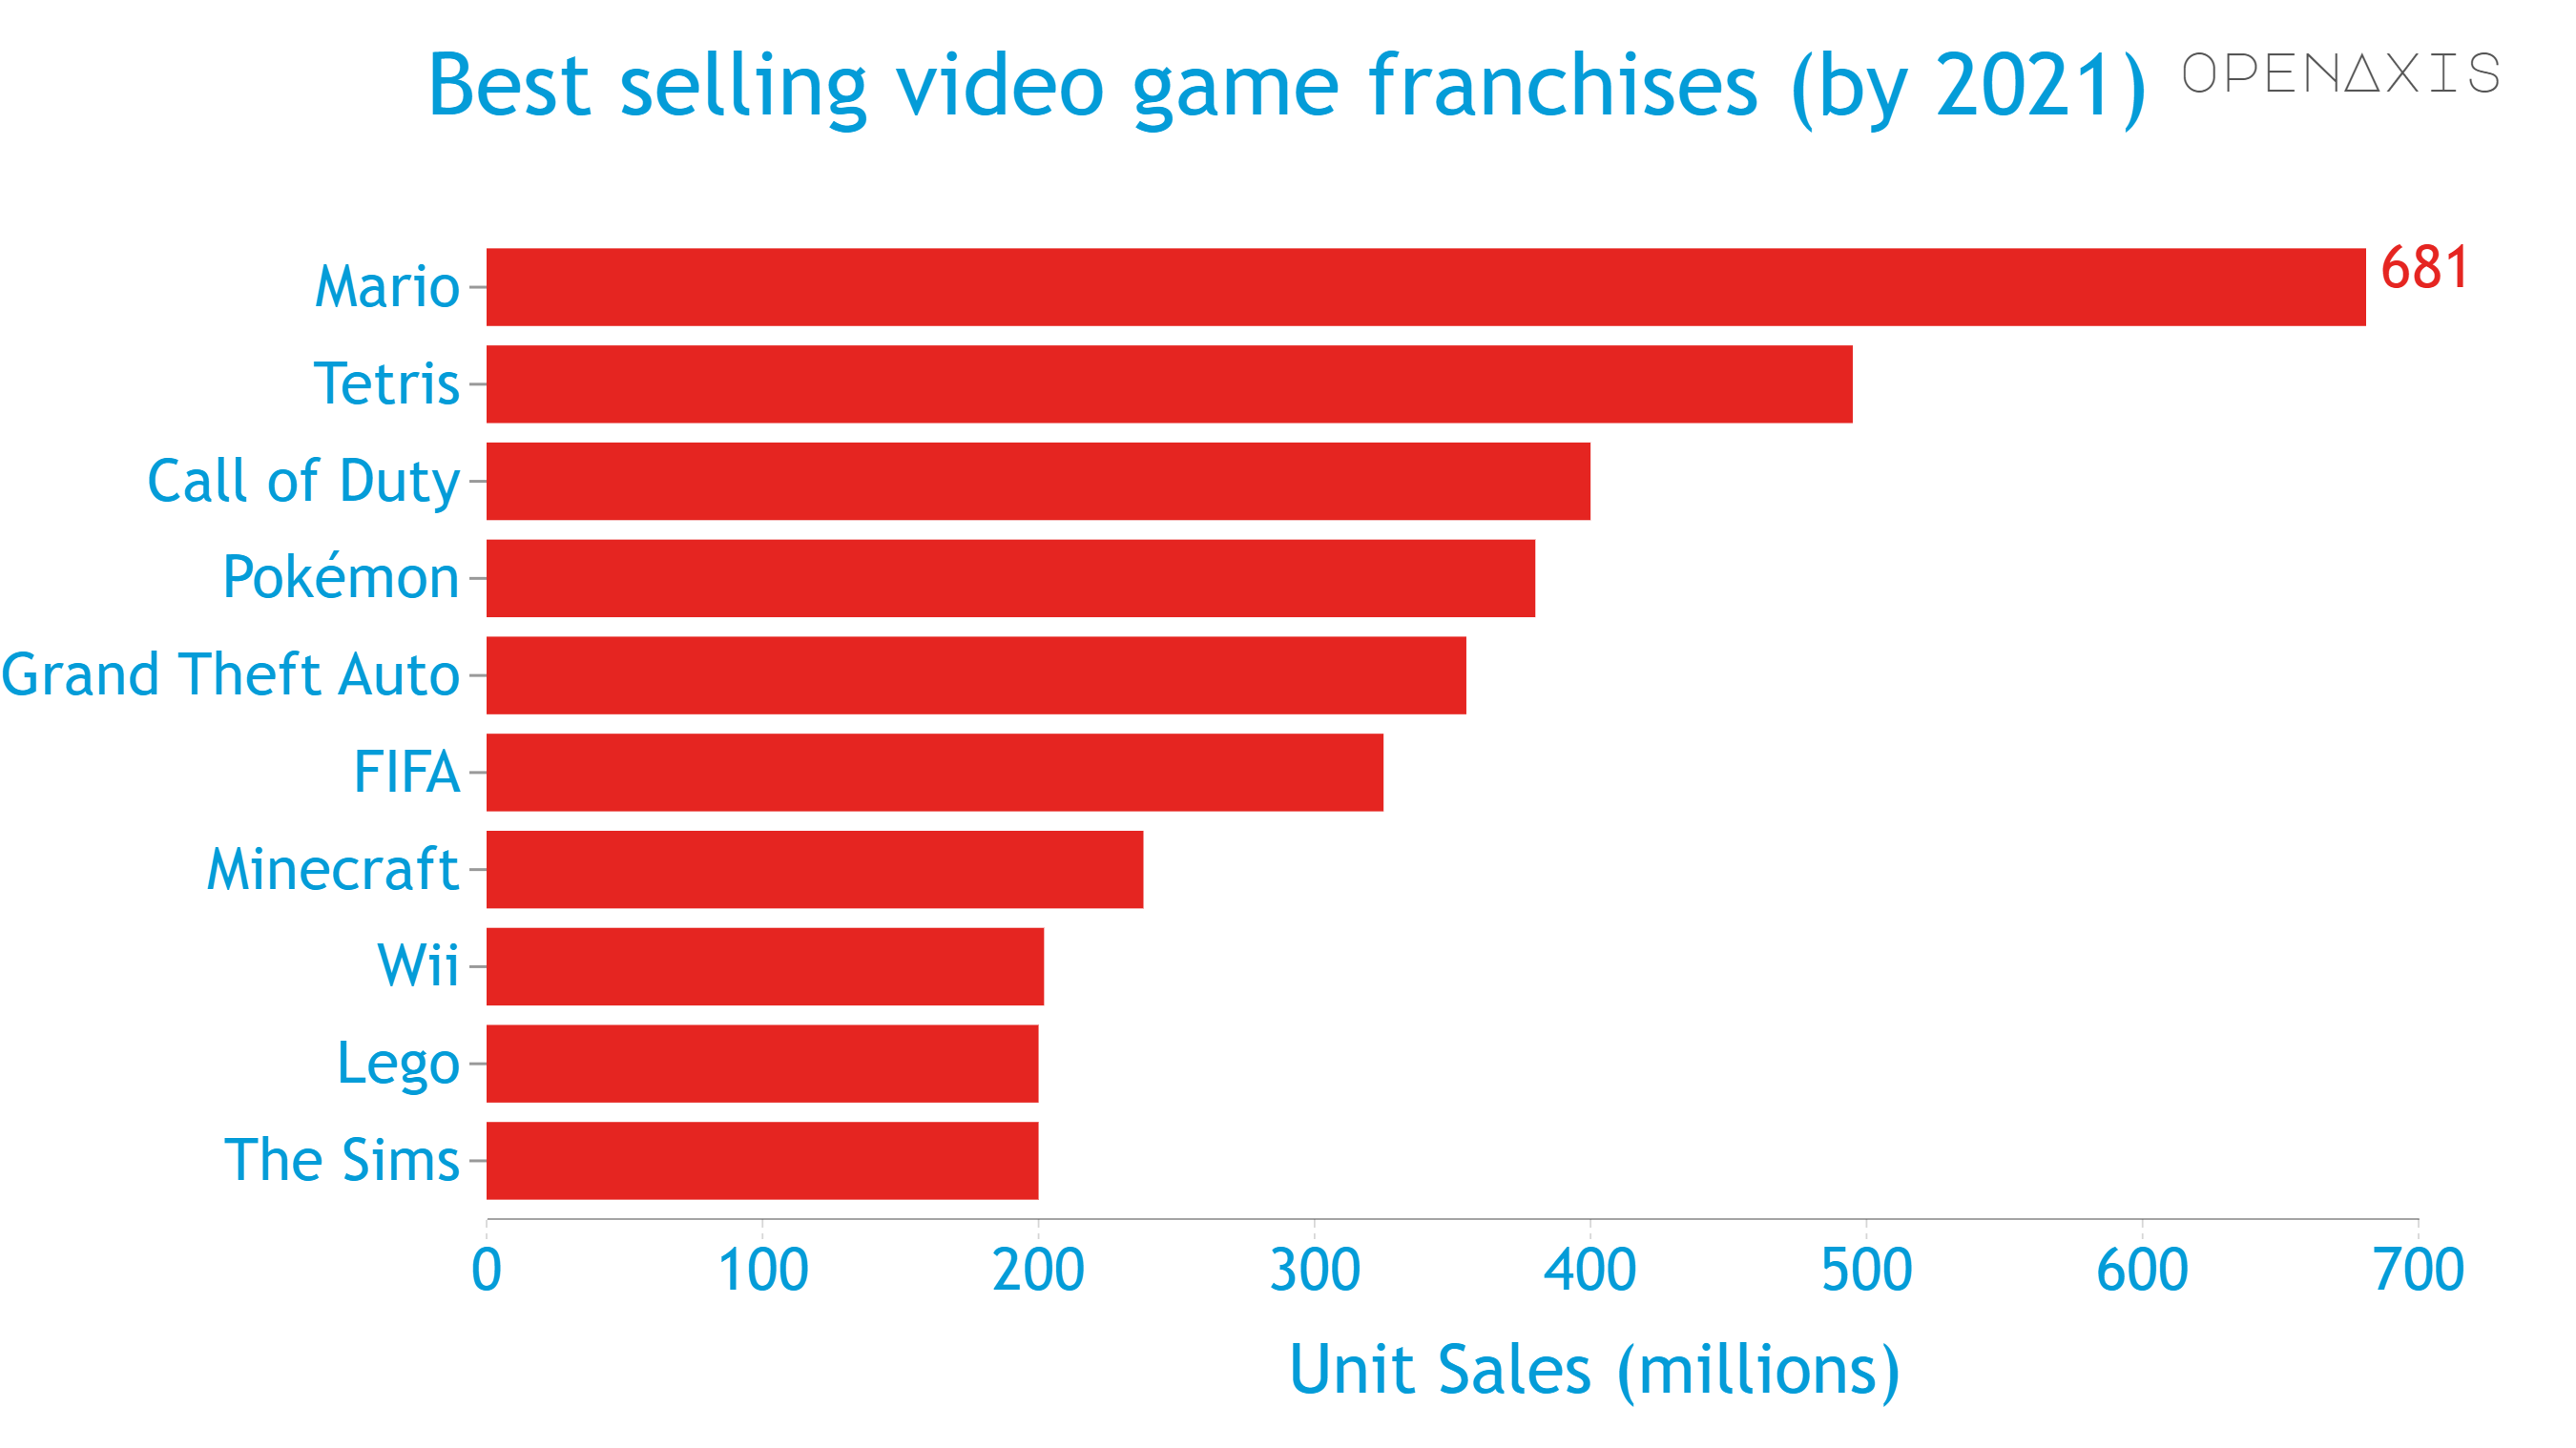 "Best selling video game franchises (by 2021)"